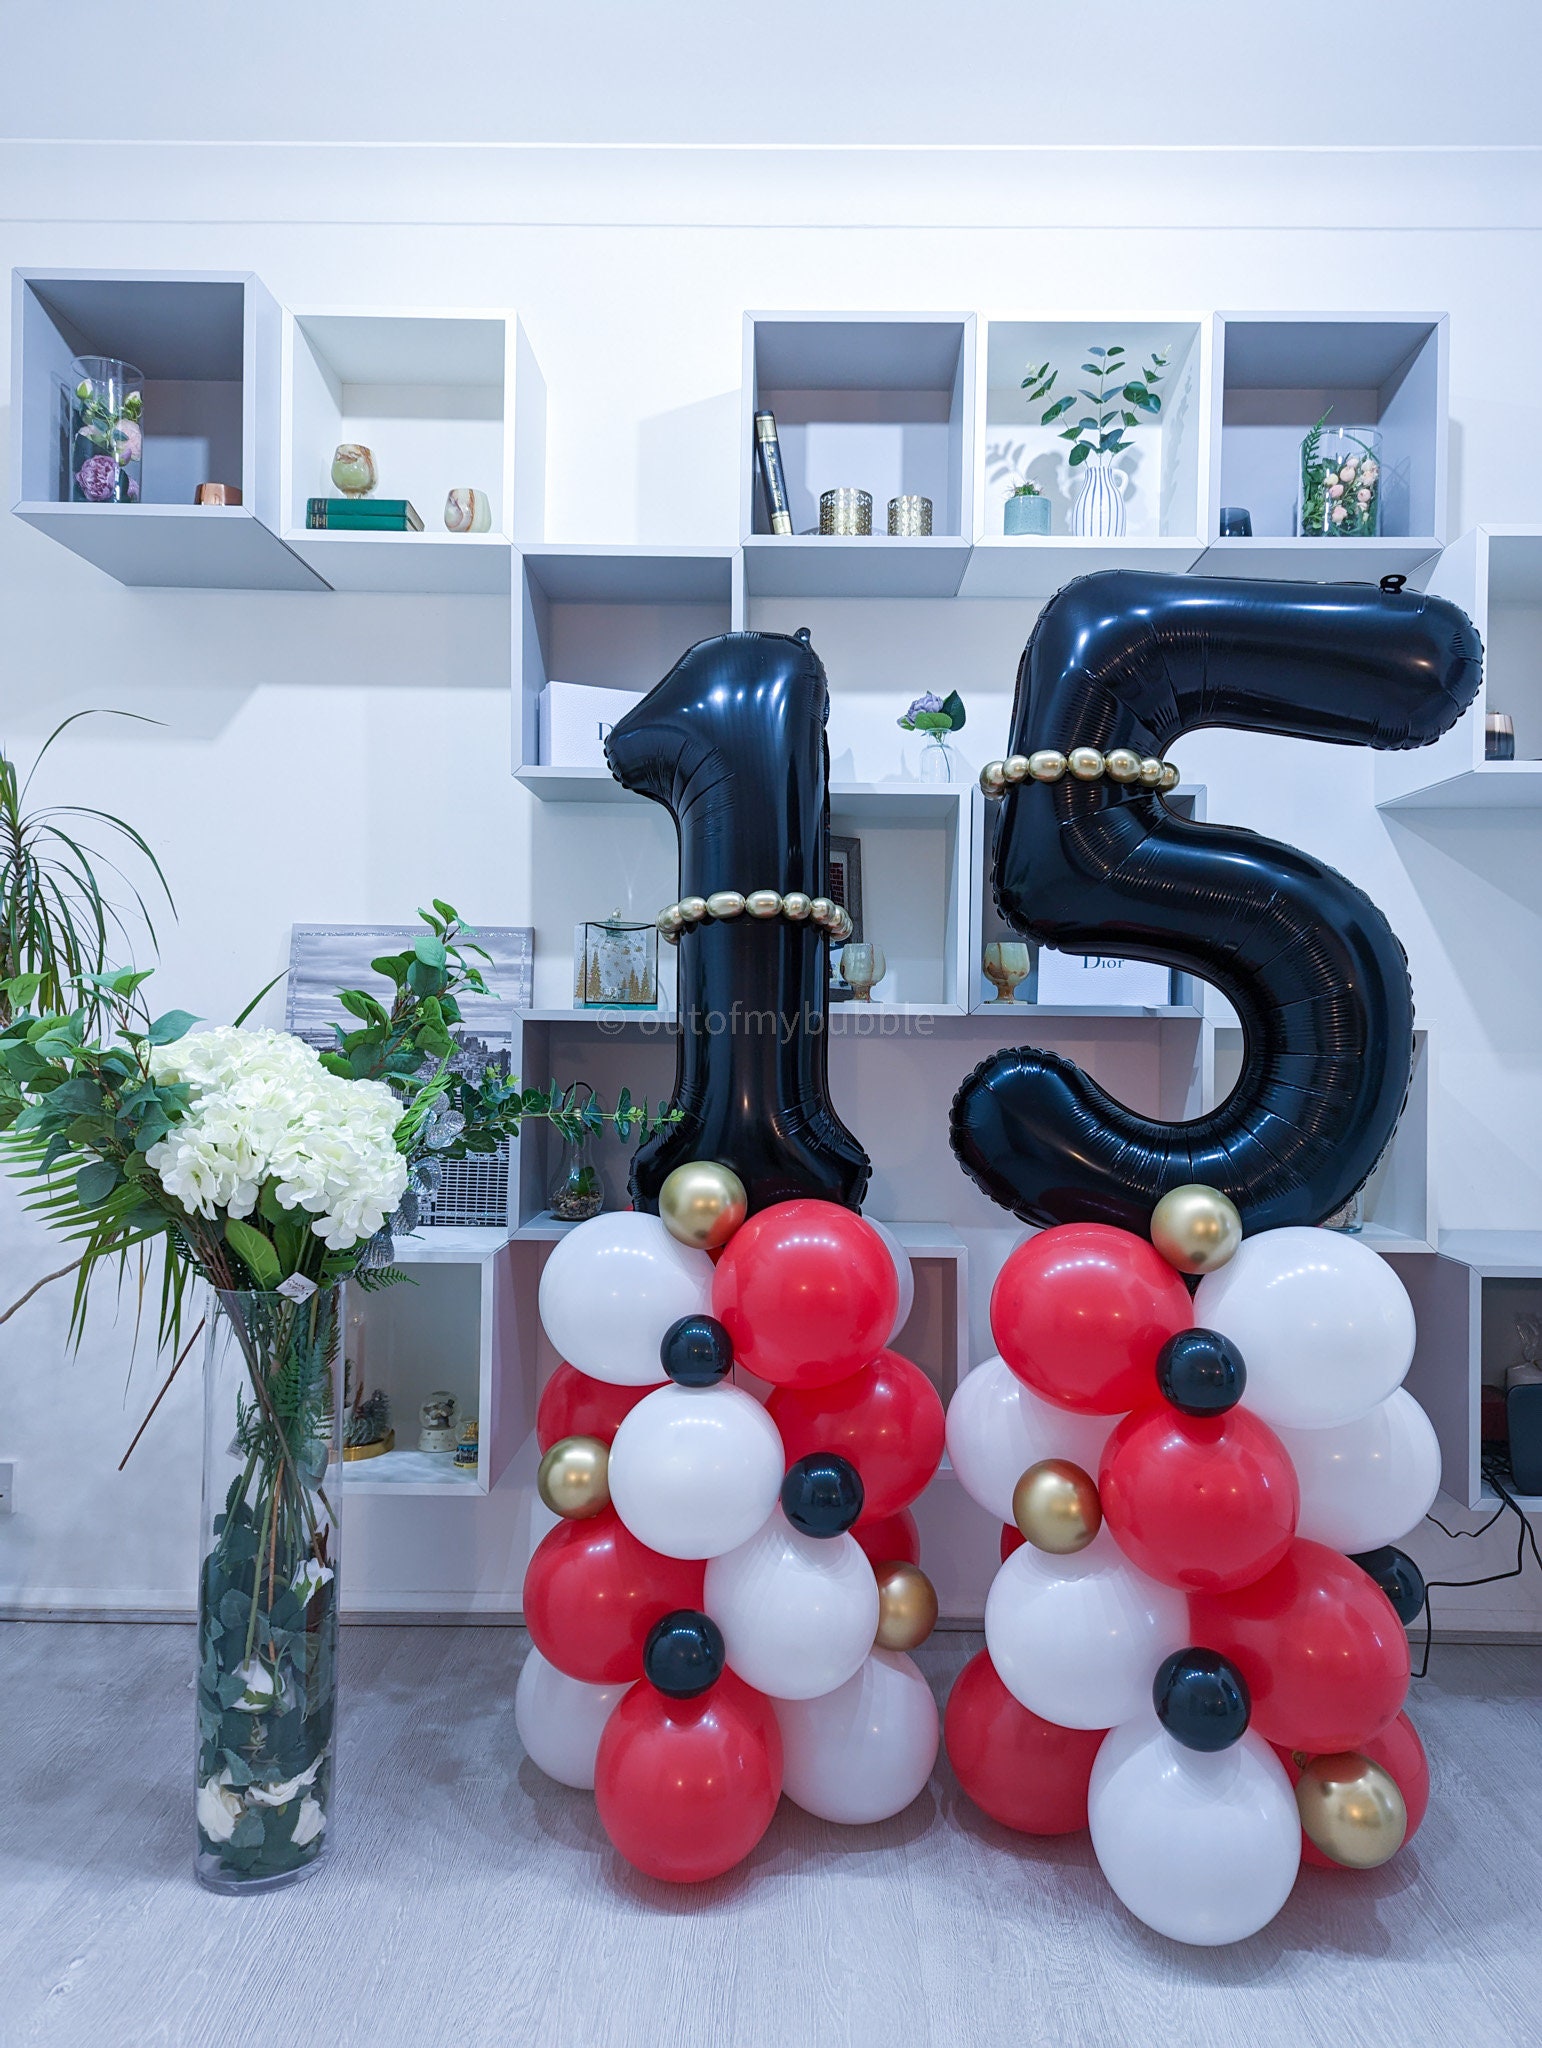 Red Black Gold Balloon Bouquet, Party Balloons, Happy 18th Birthday  Decorations, Gold Numbers, Decor, Happy 4th, Boys Birthday, Garland, 50 